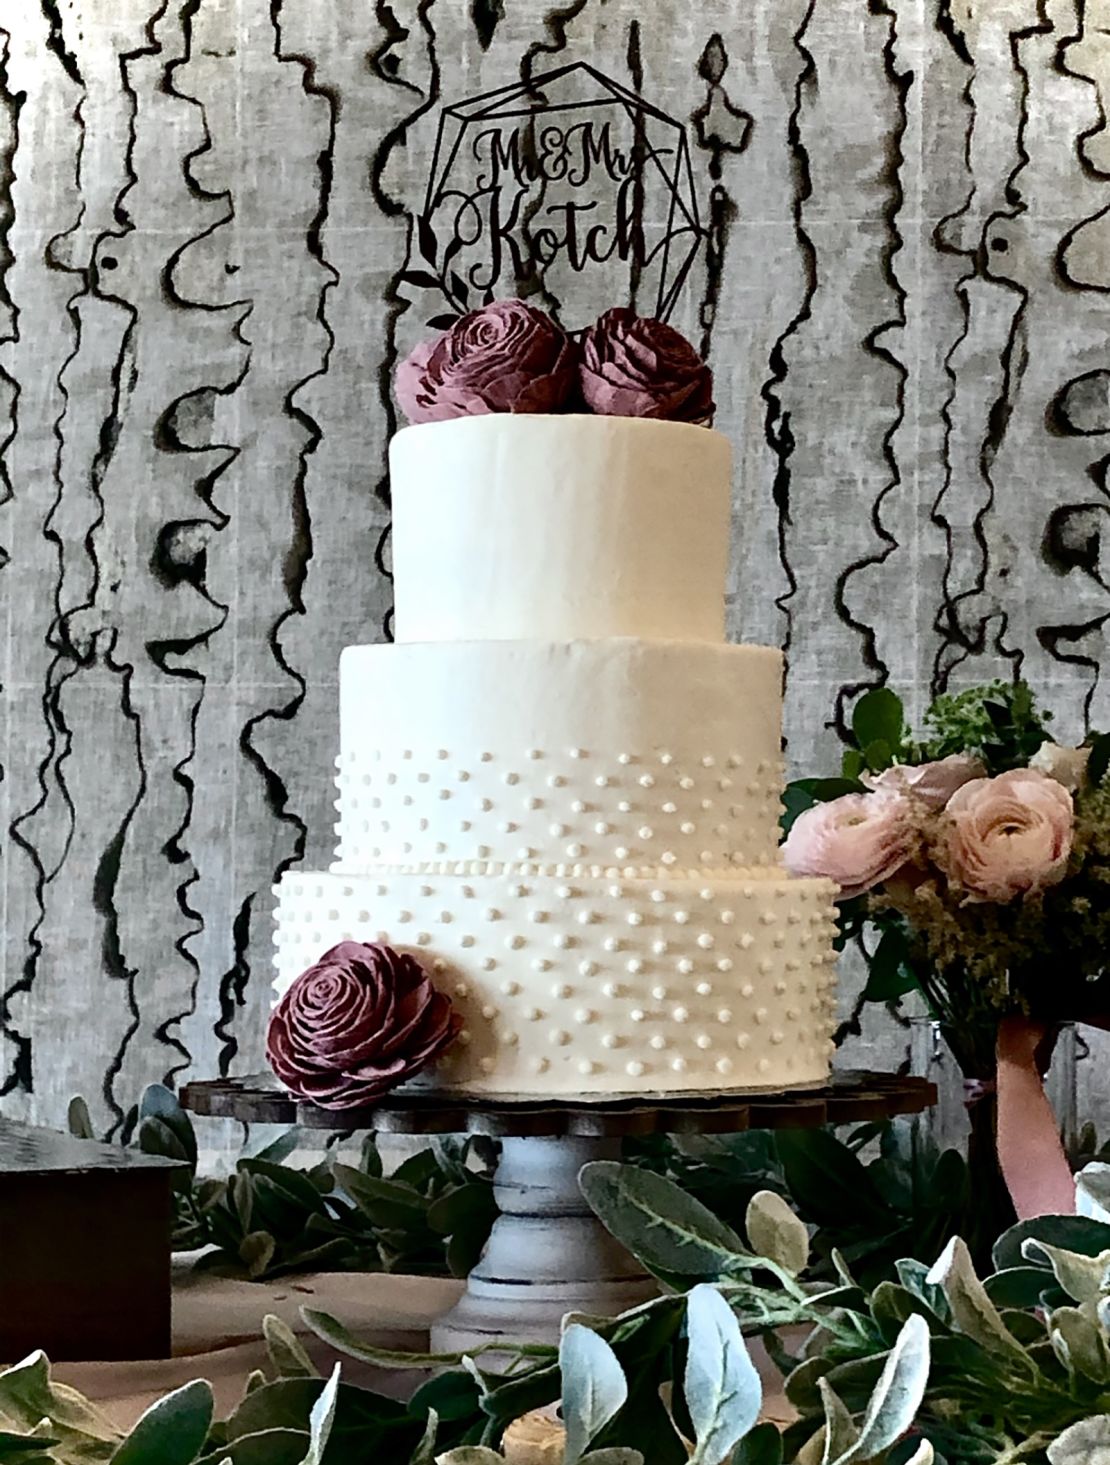 Alyssa Young, the owner of Cake Llama in Texas, has had to diversify her business away from the wedding industry. 